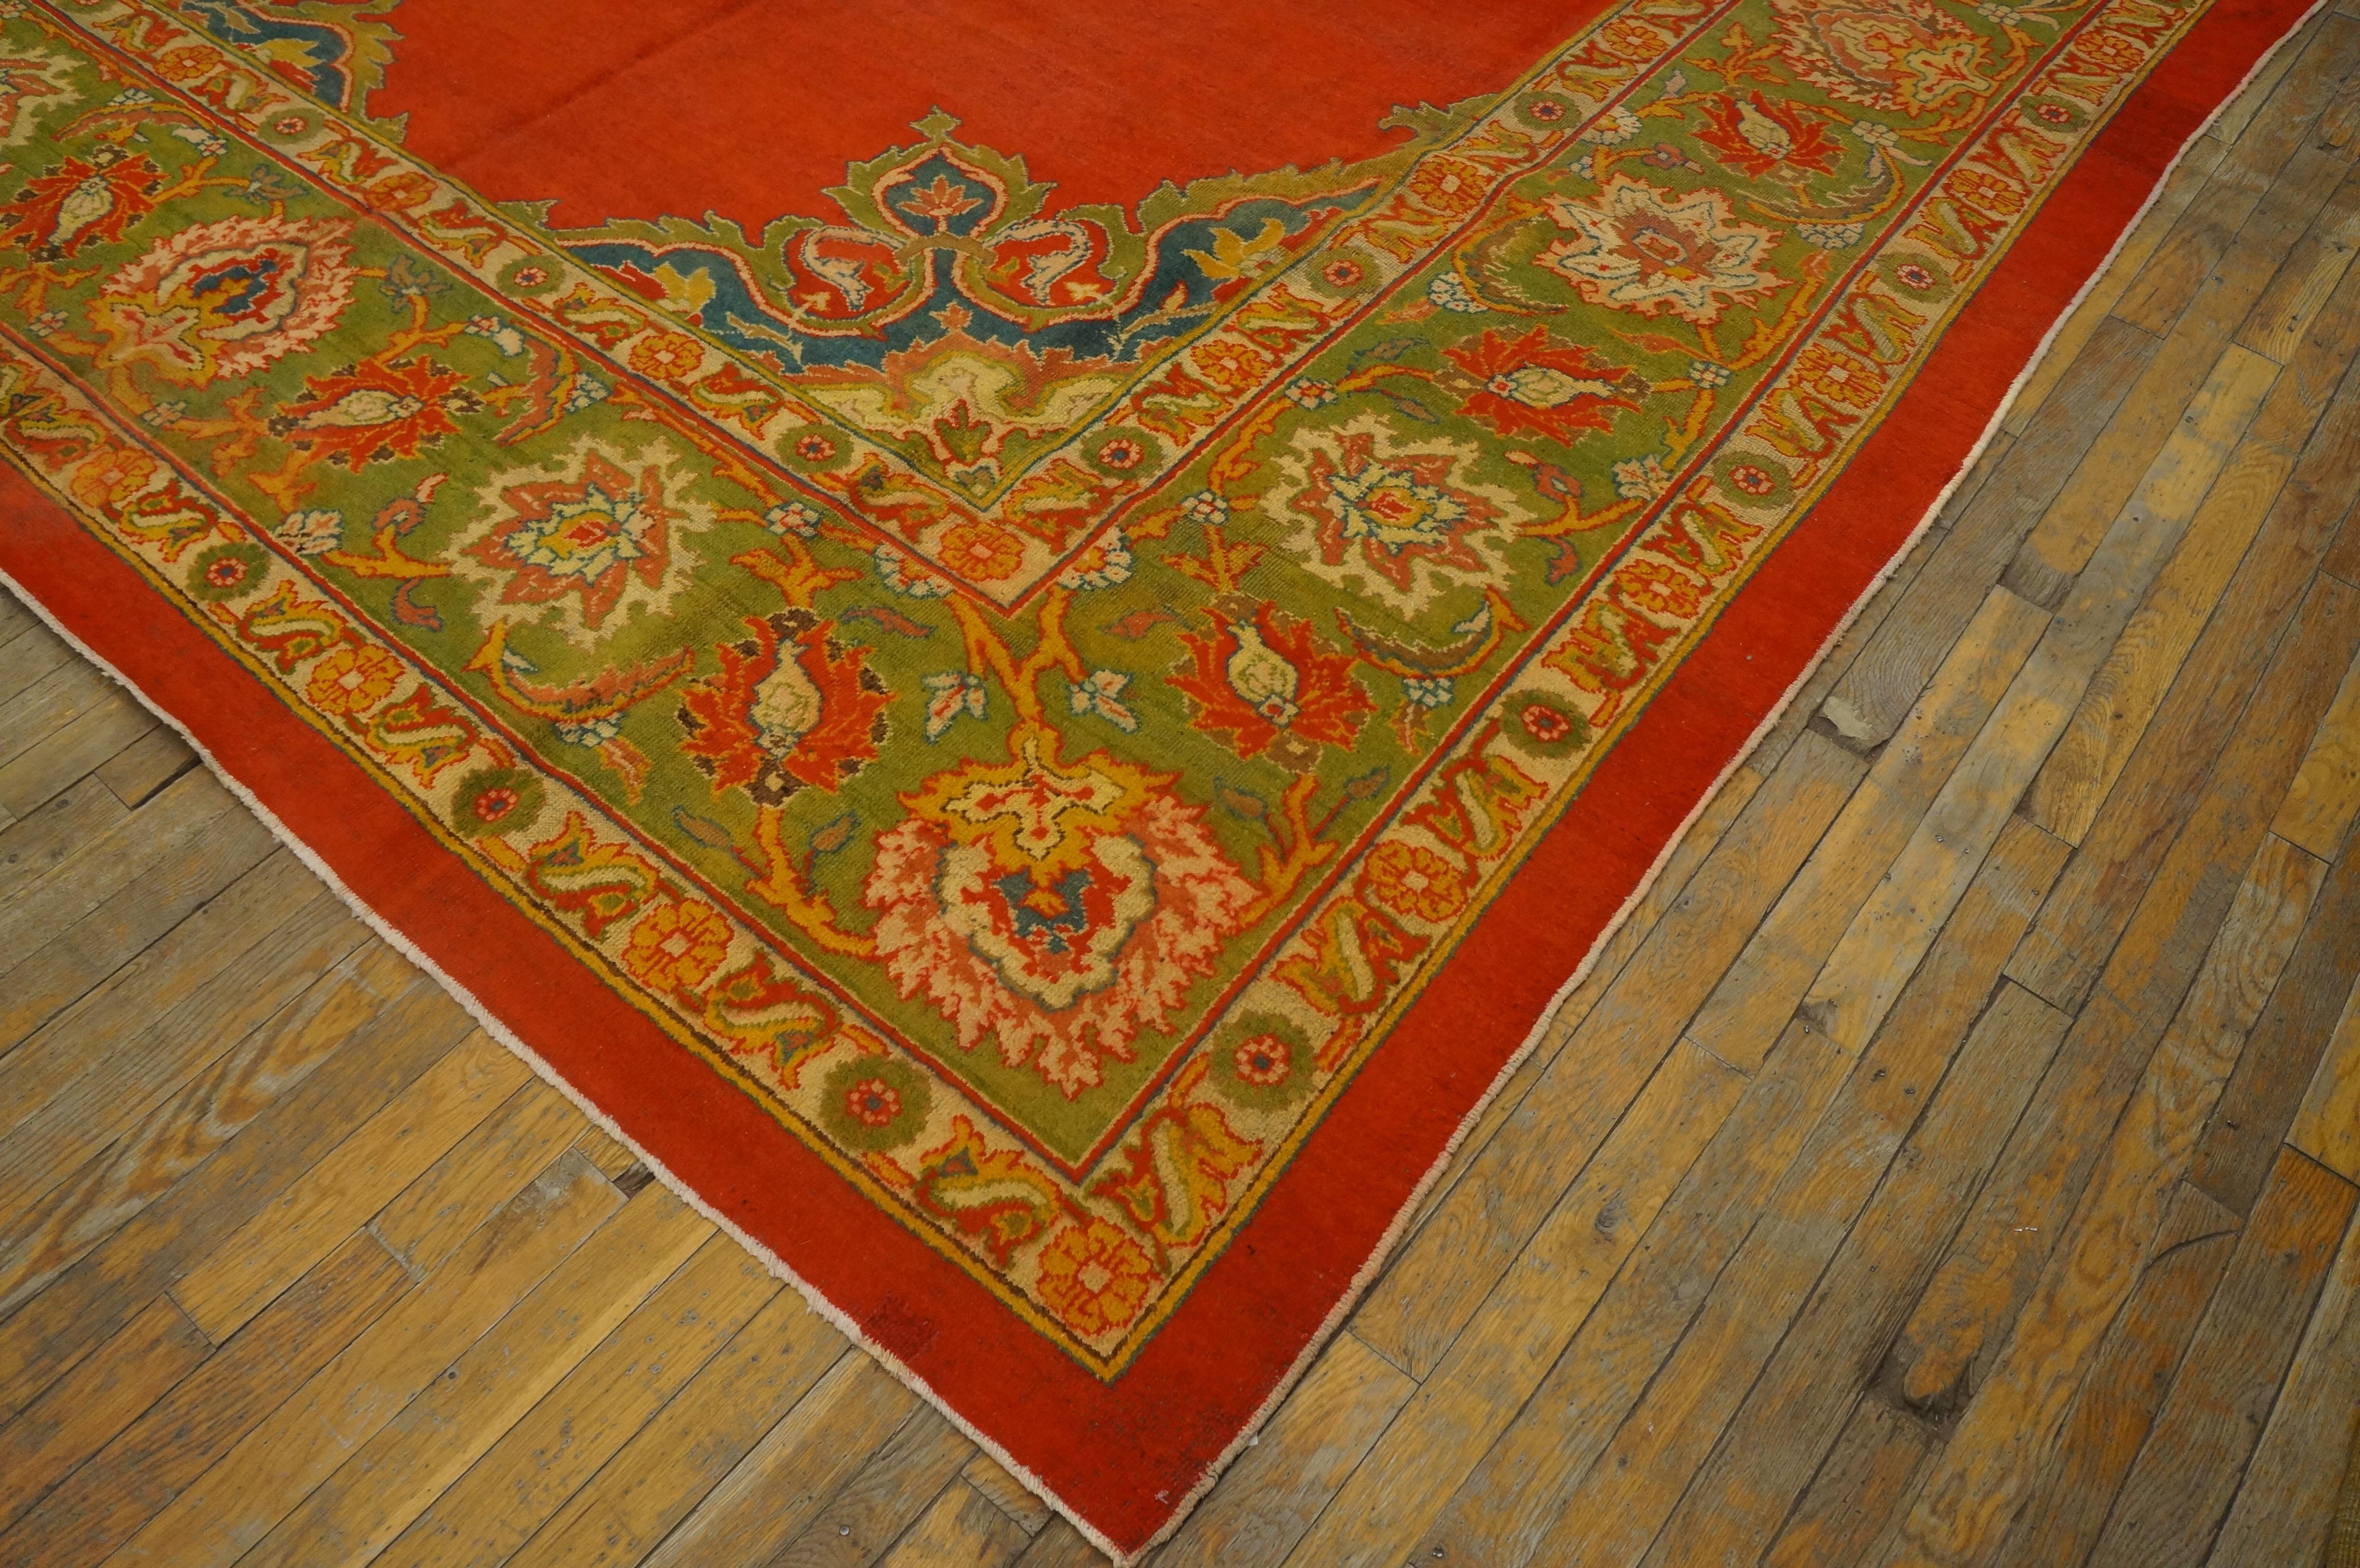 Early 20th Century N. Indian Amritsar Carpet ( 9' x 12' - 275 x 365 ) For Sale 3